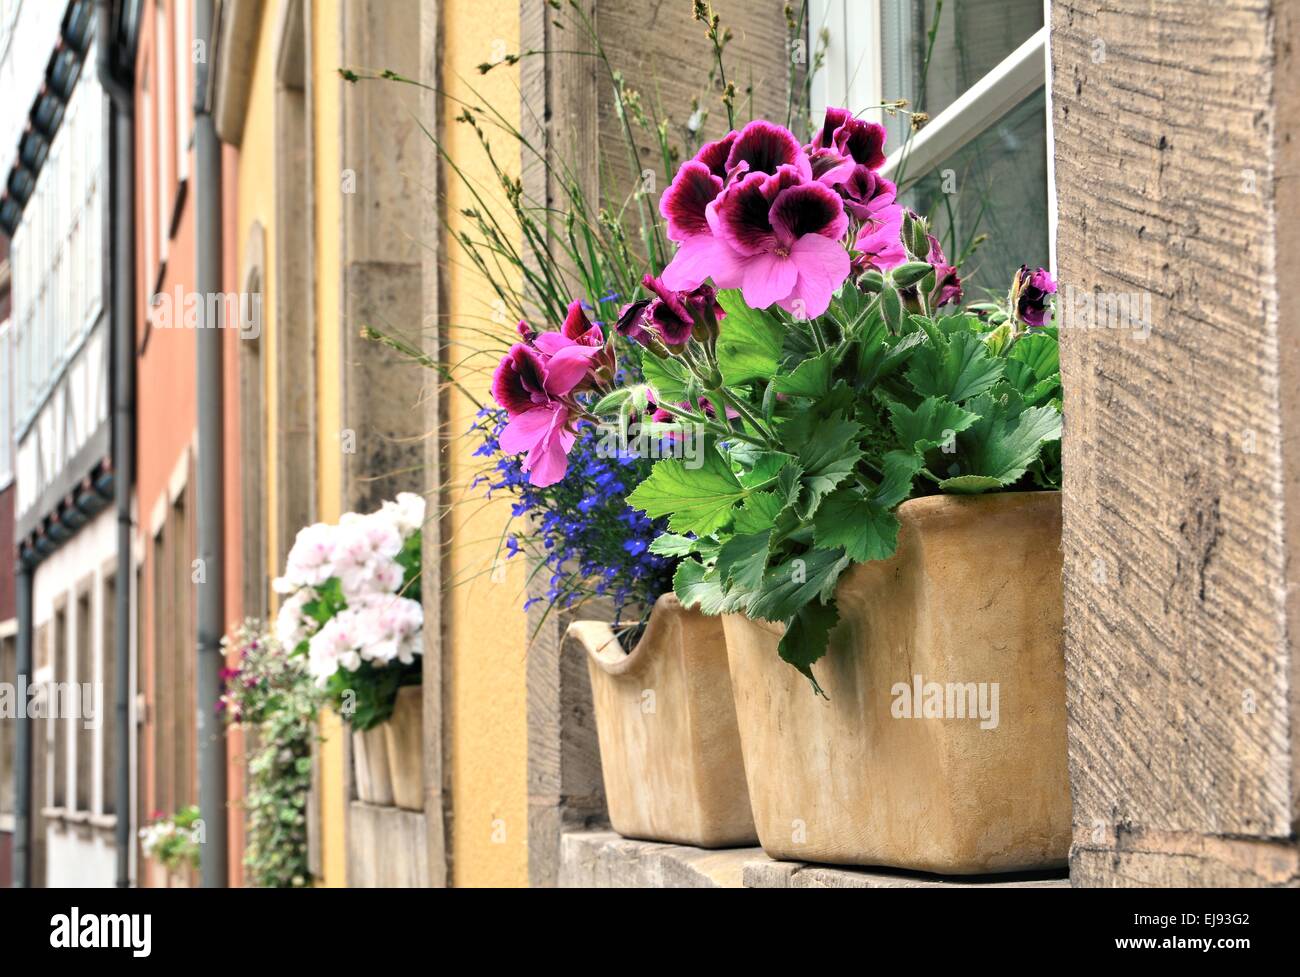 Flowers in the window of a house Stock Photo